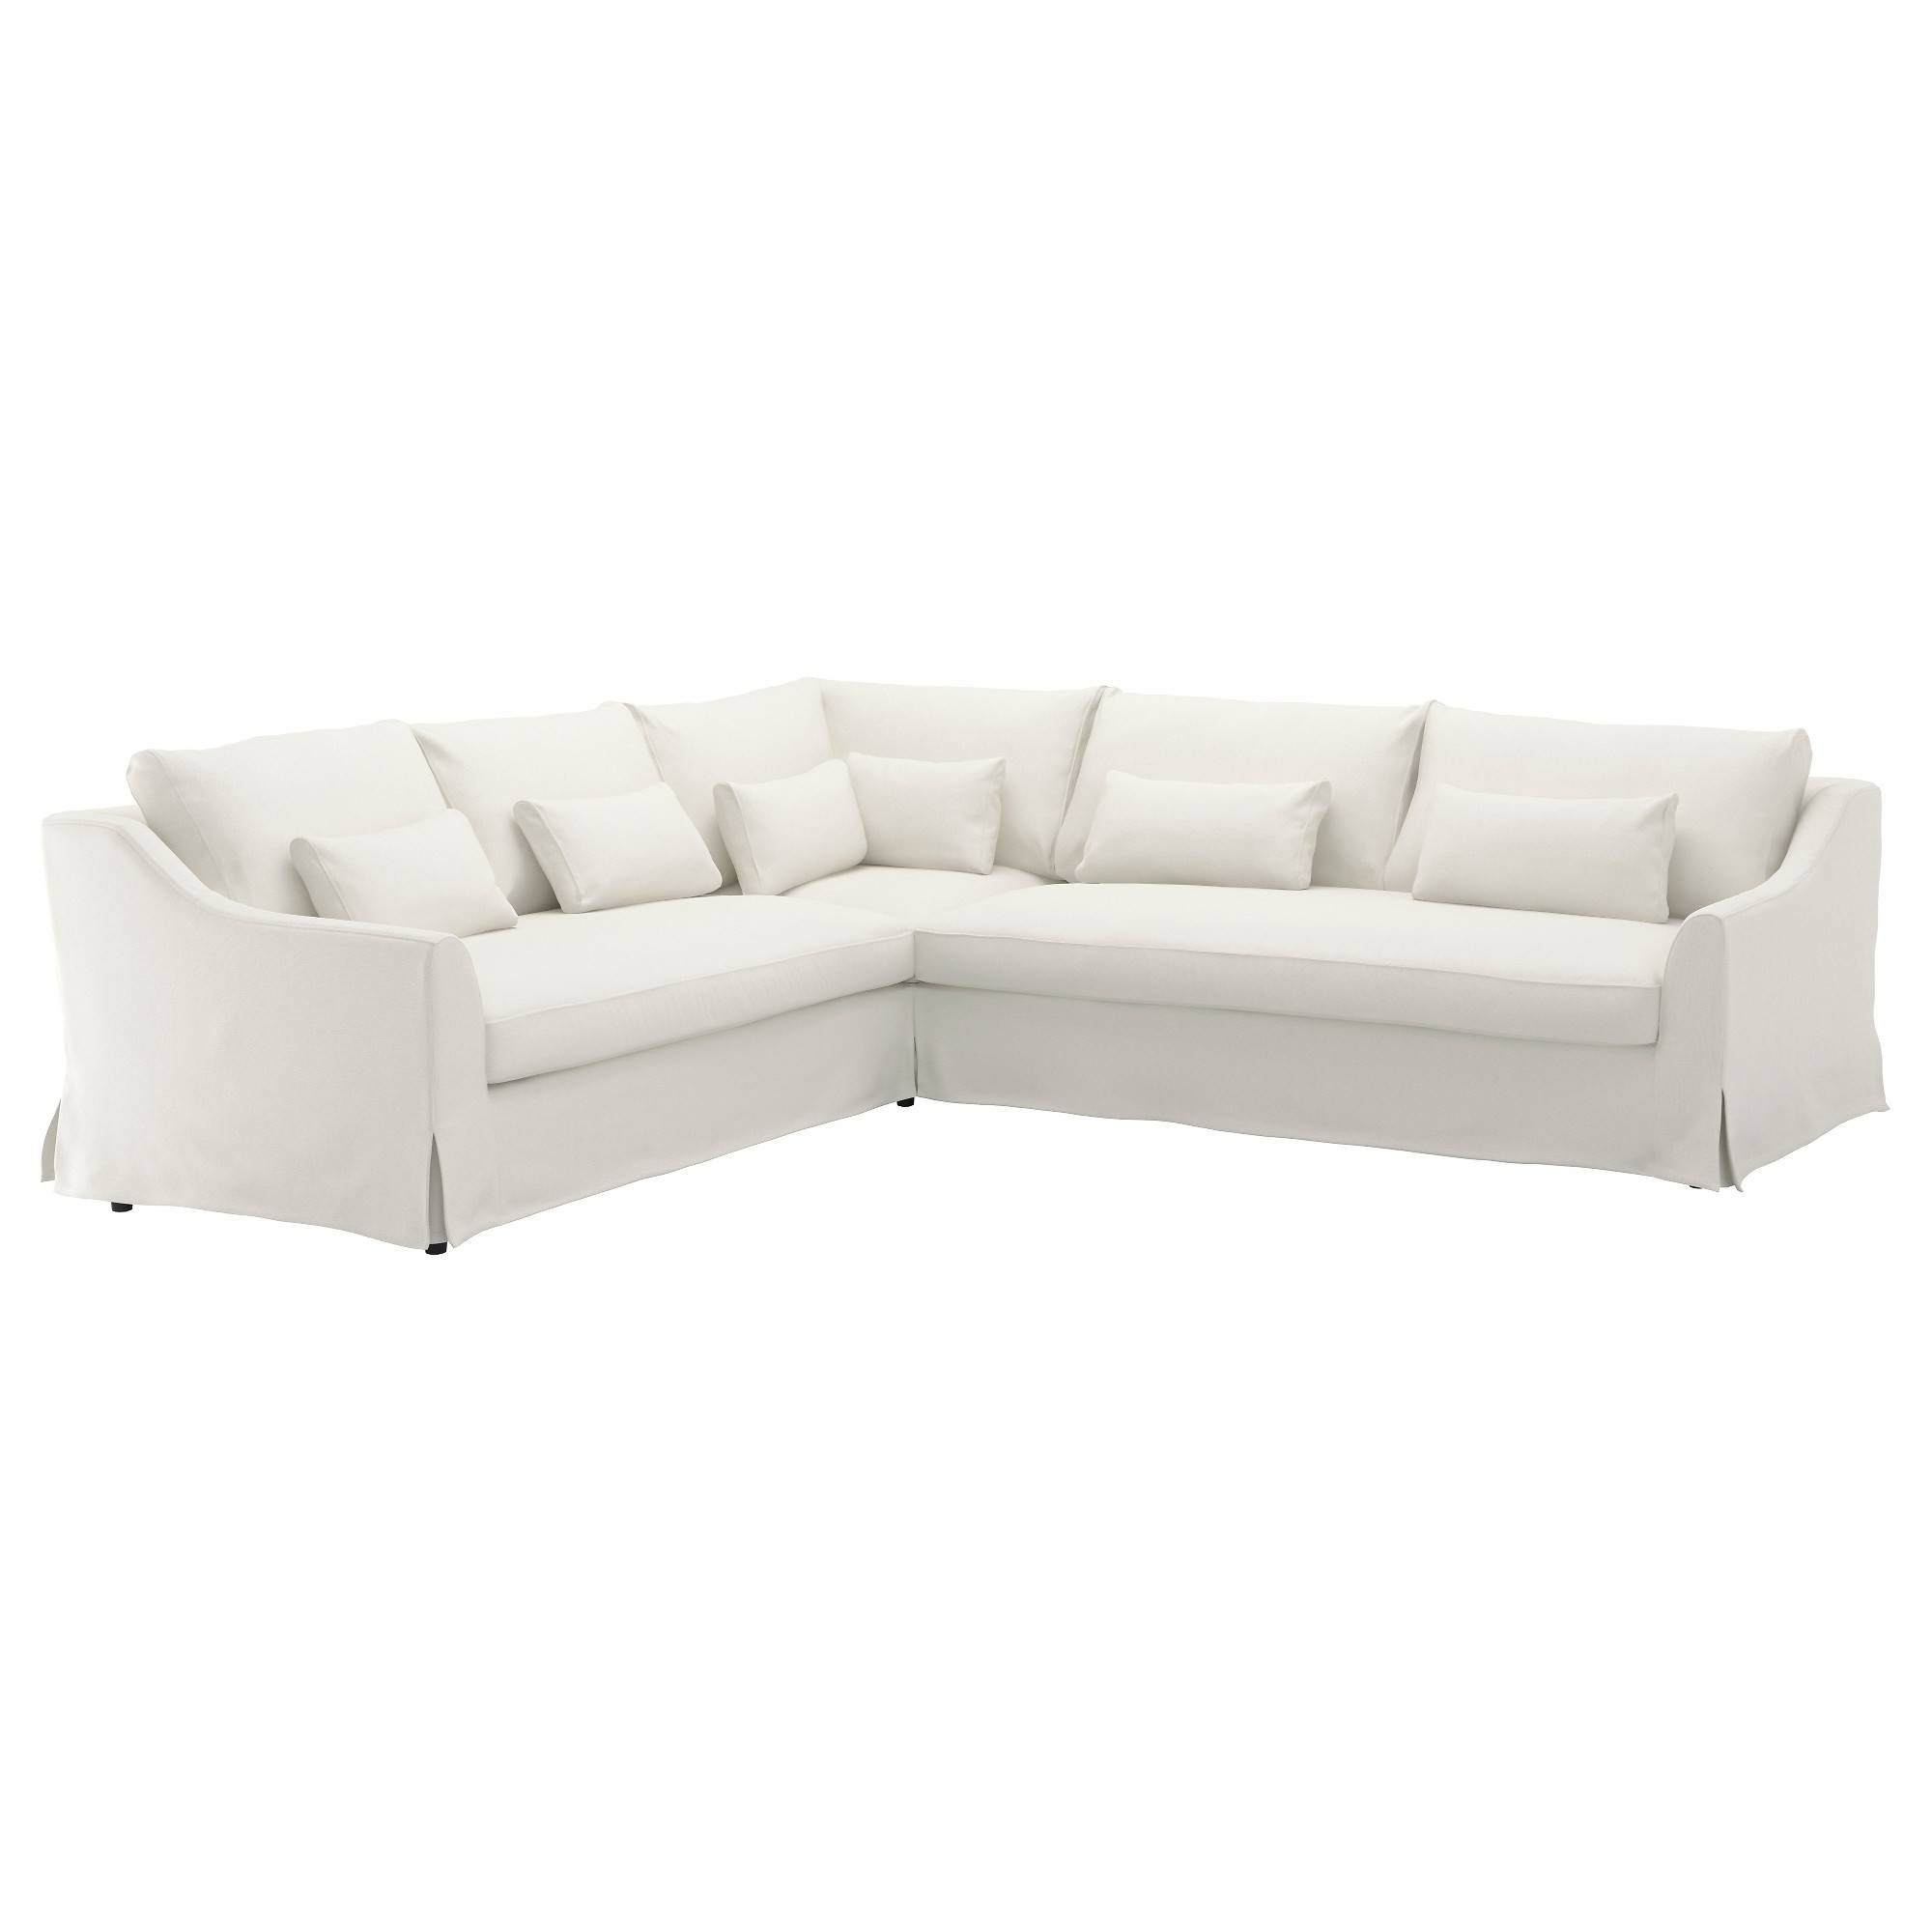 Fabric Sectional Sofas – Ikea With 2x2 Corner Sofas (View 26 of 30)